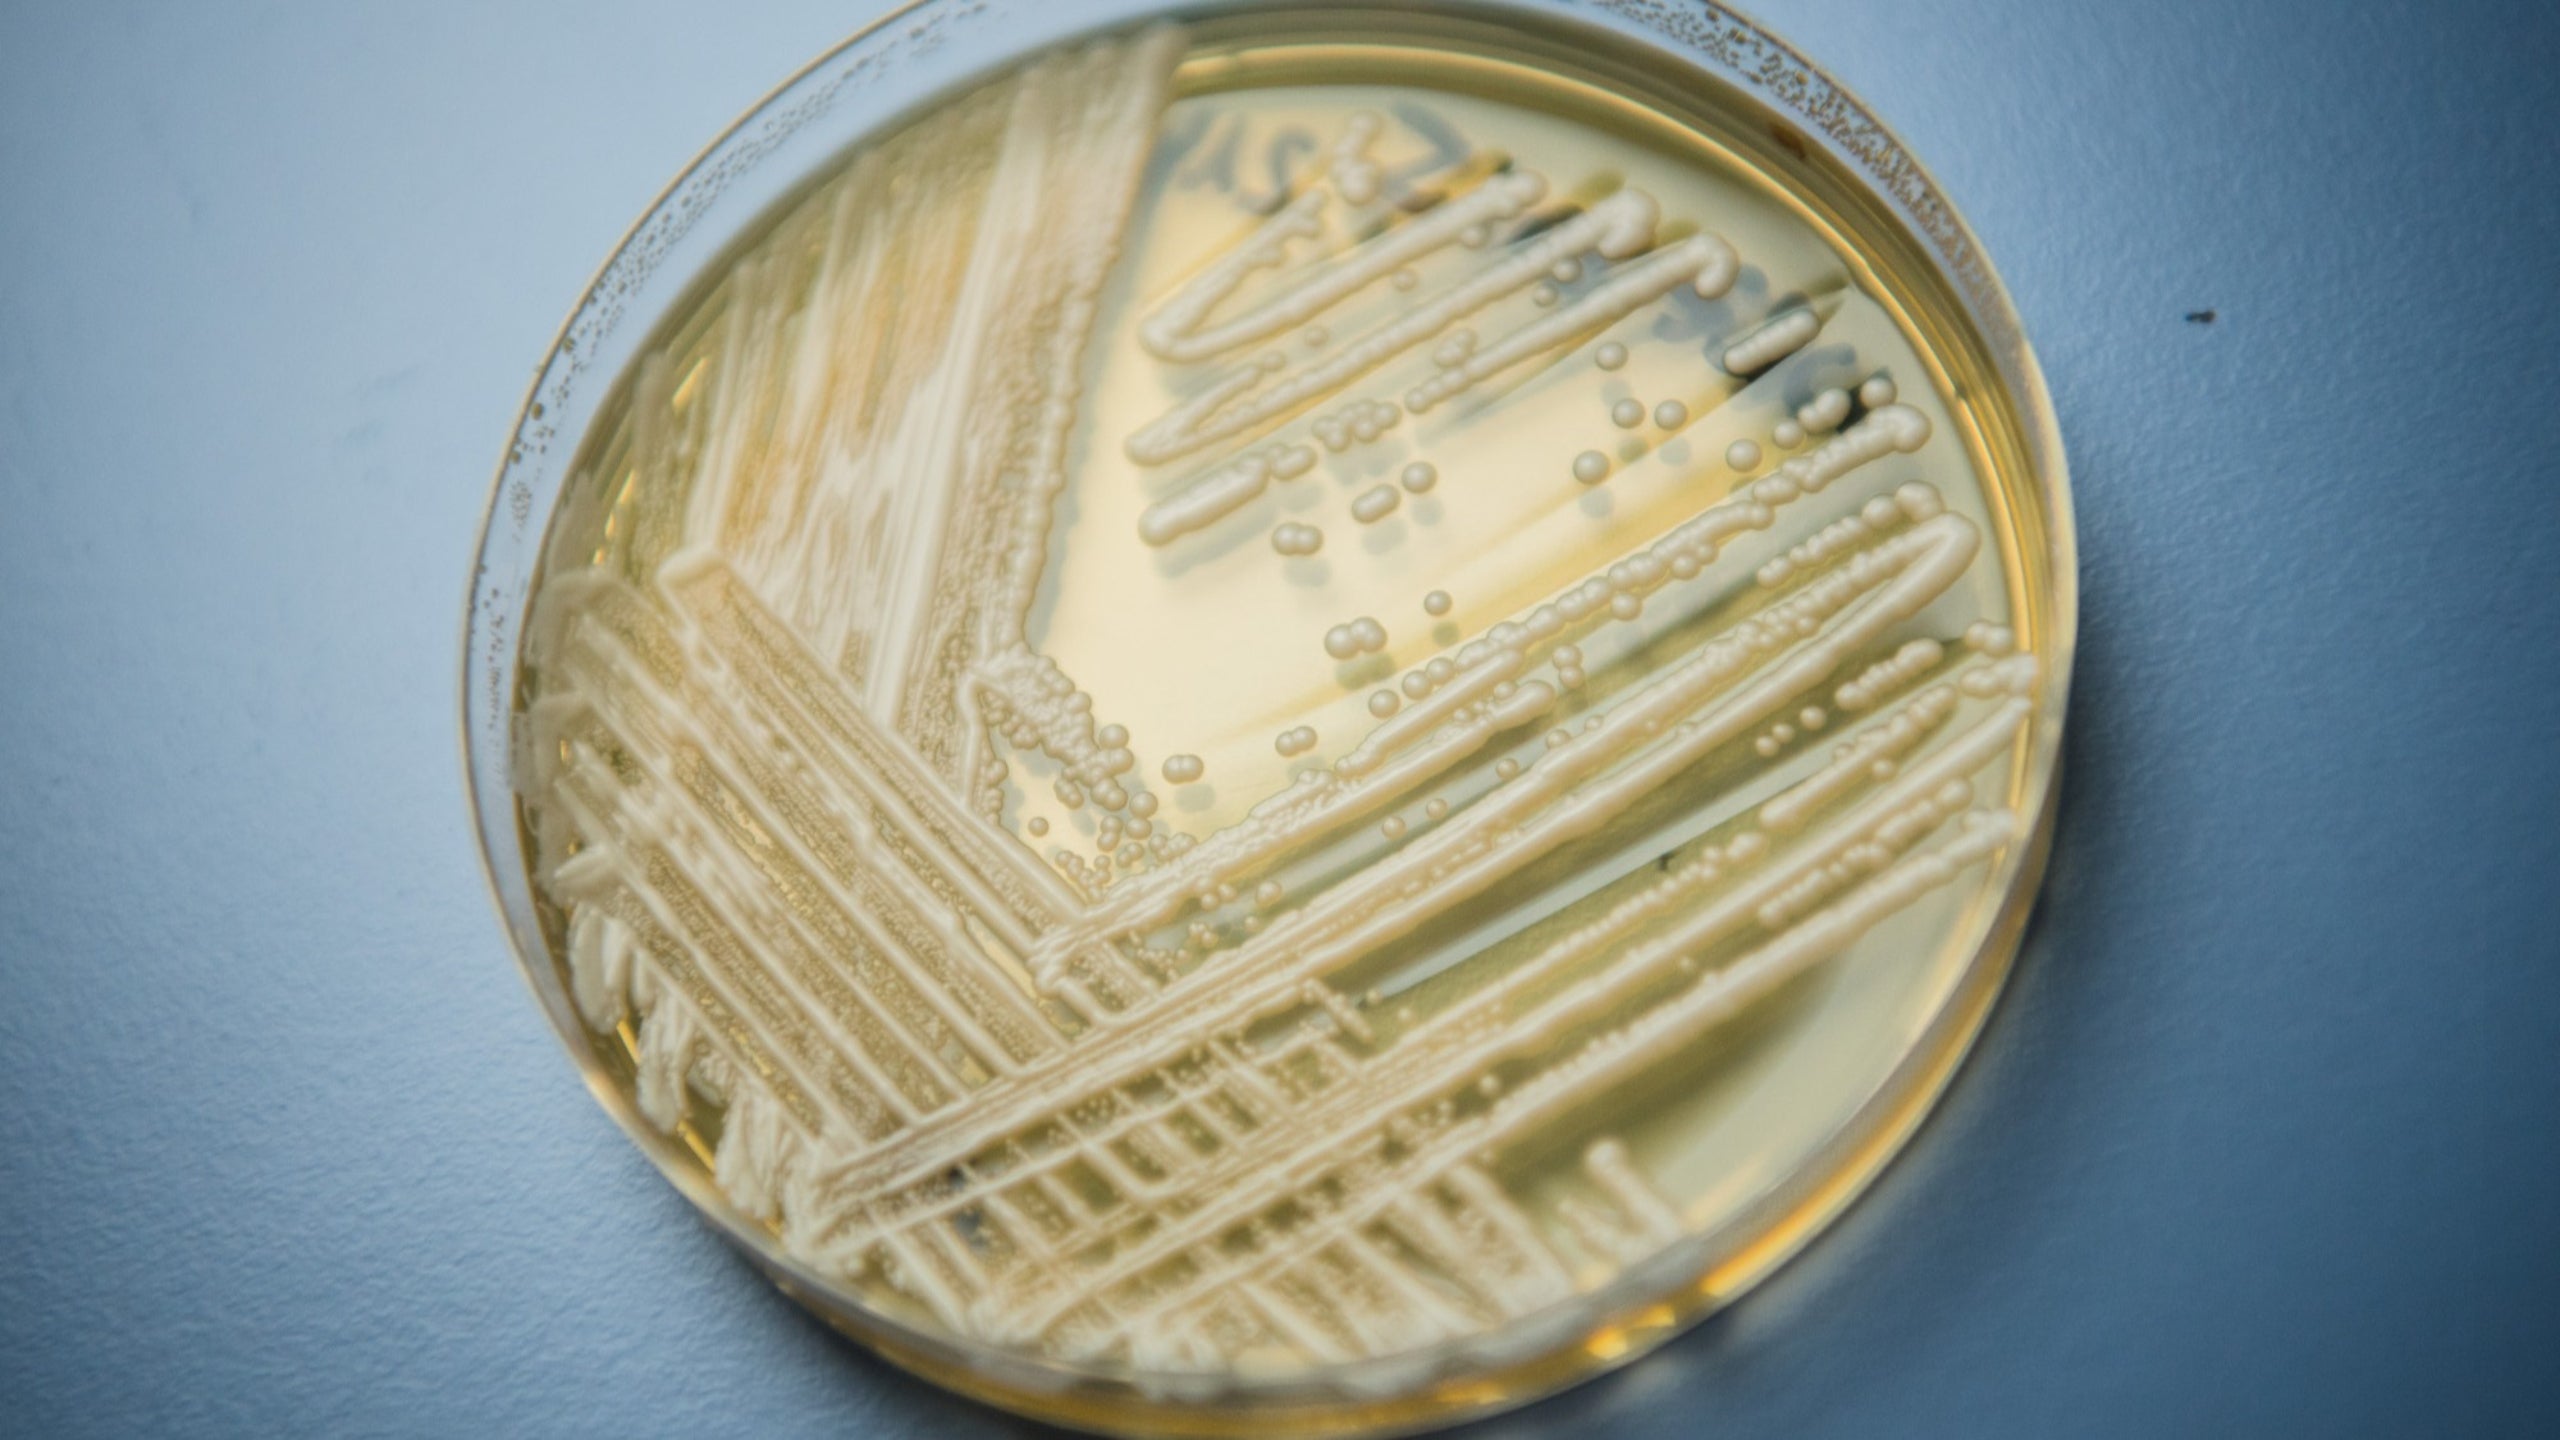 A drug-resistant fungus is spreading in US hospitals—here’s what you need to know